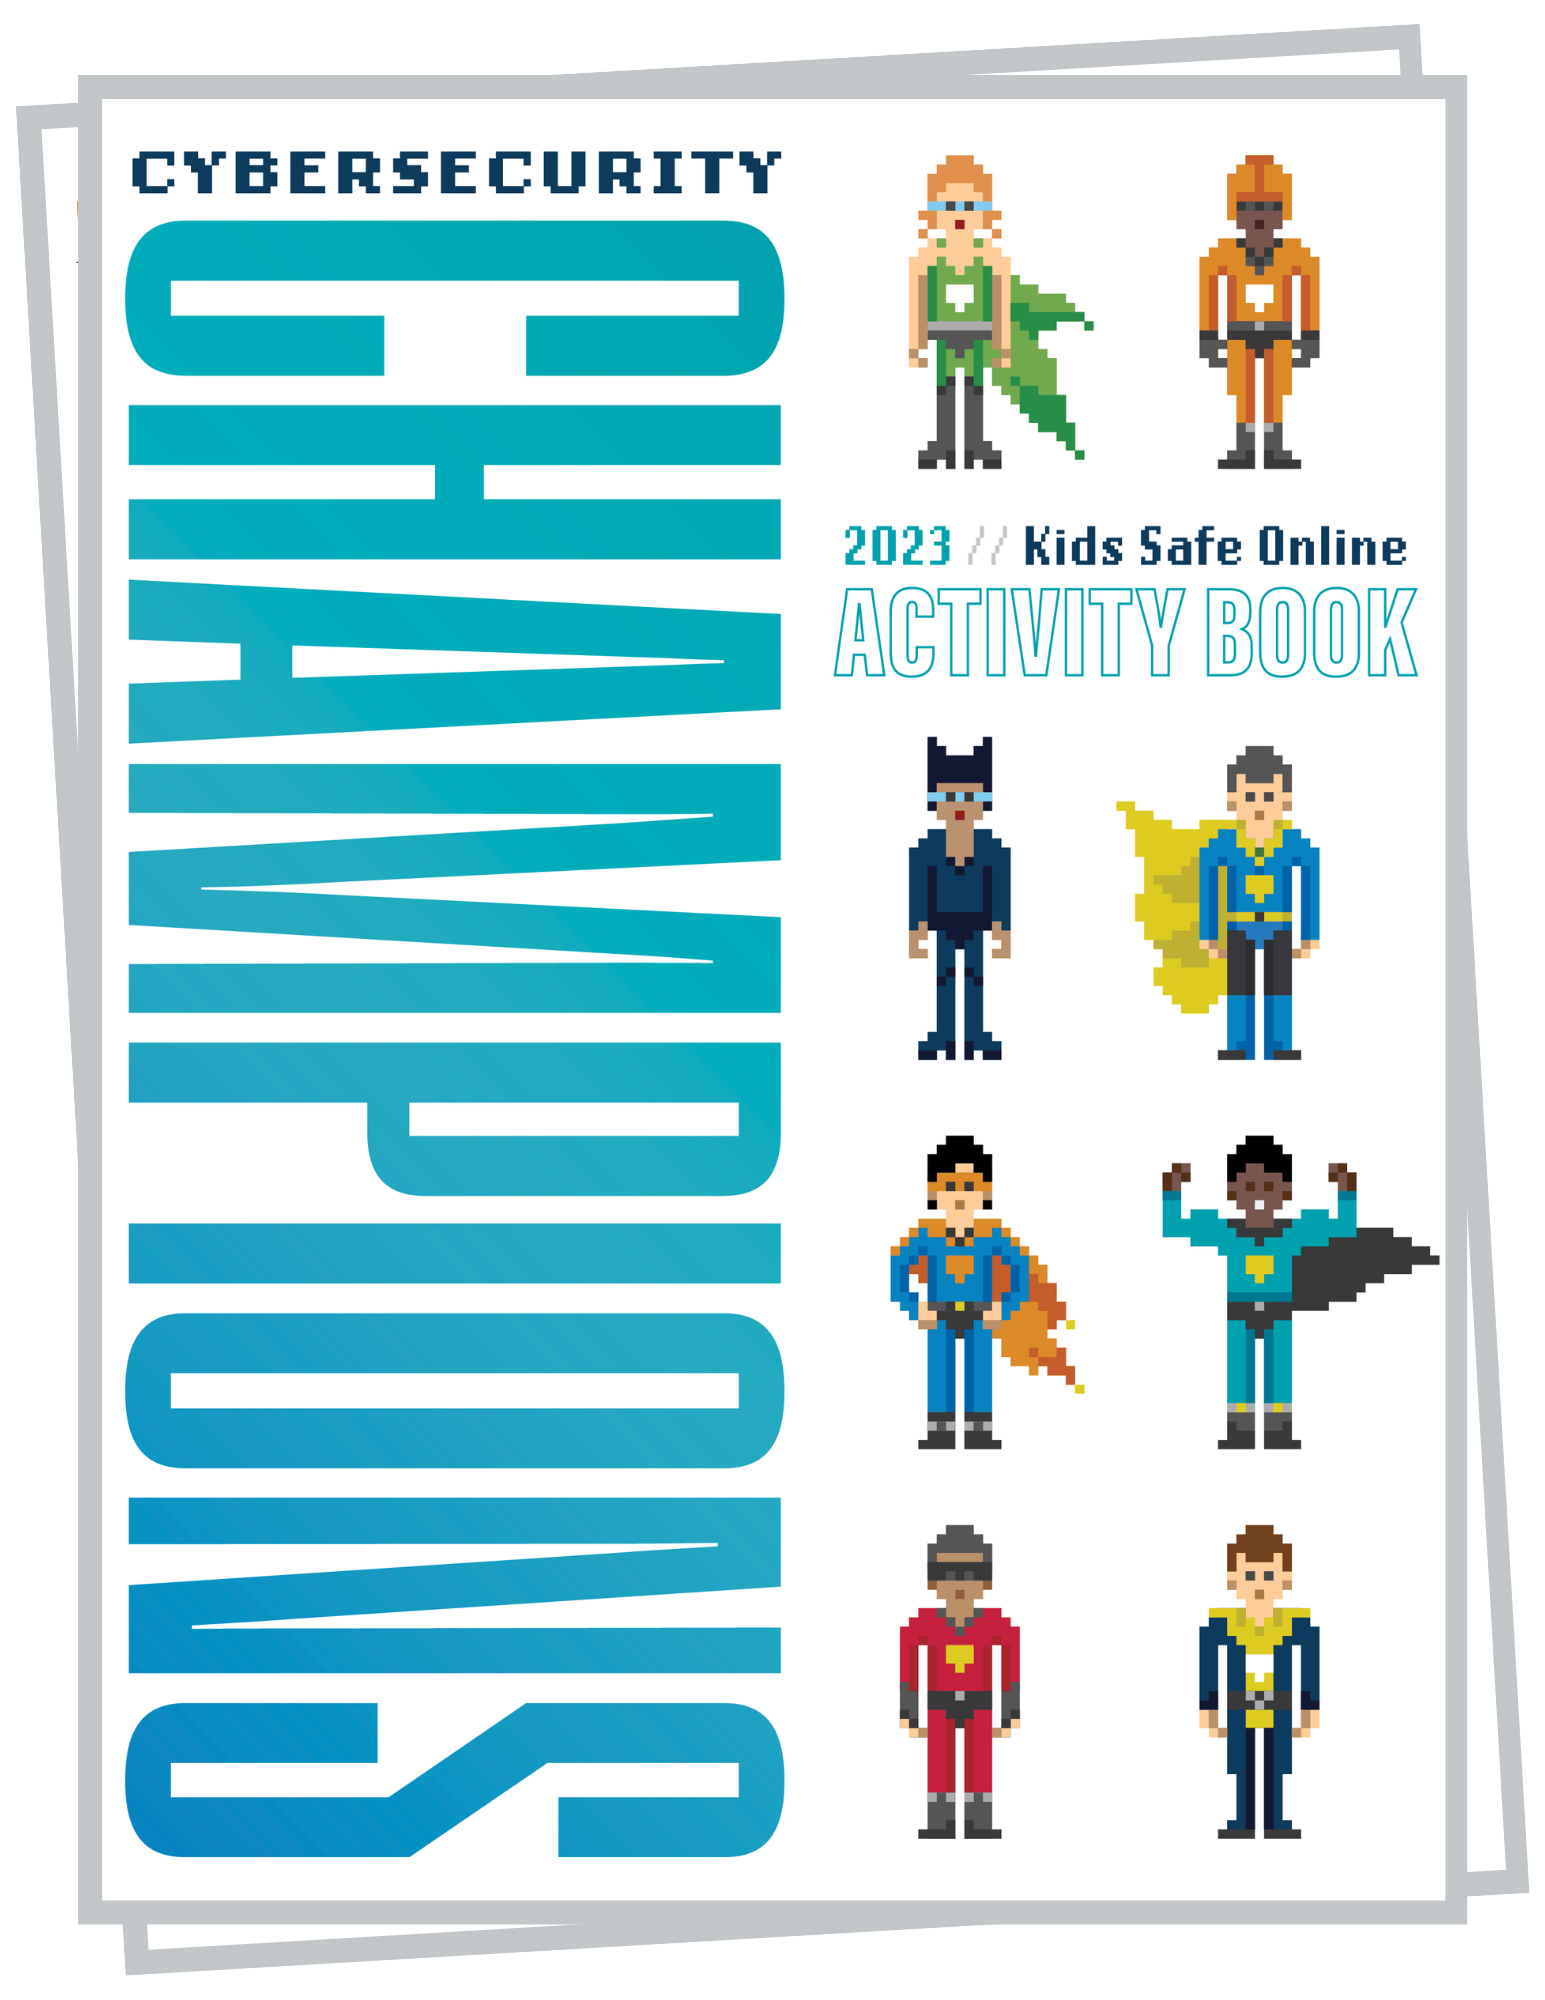 Online Gaming Safety Activity Pack